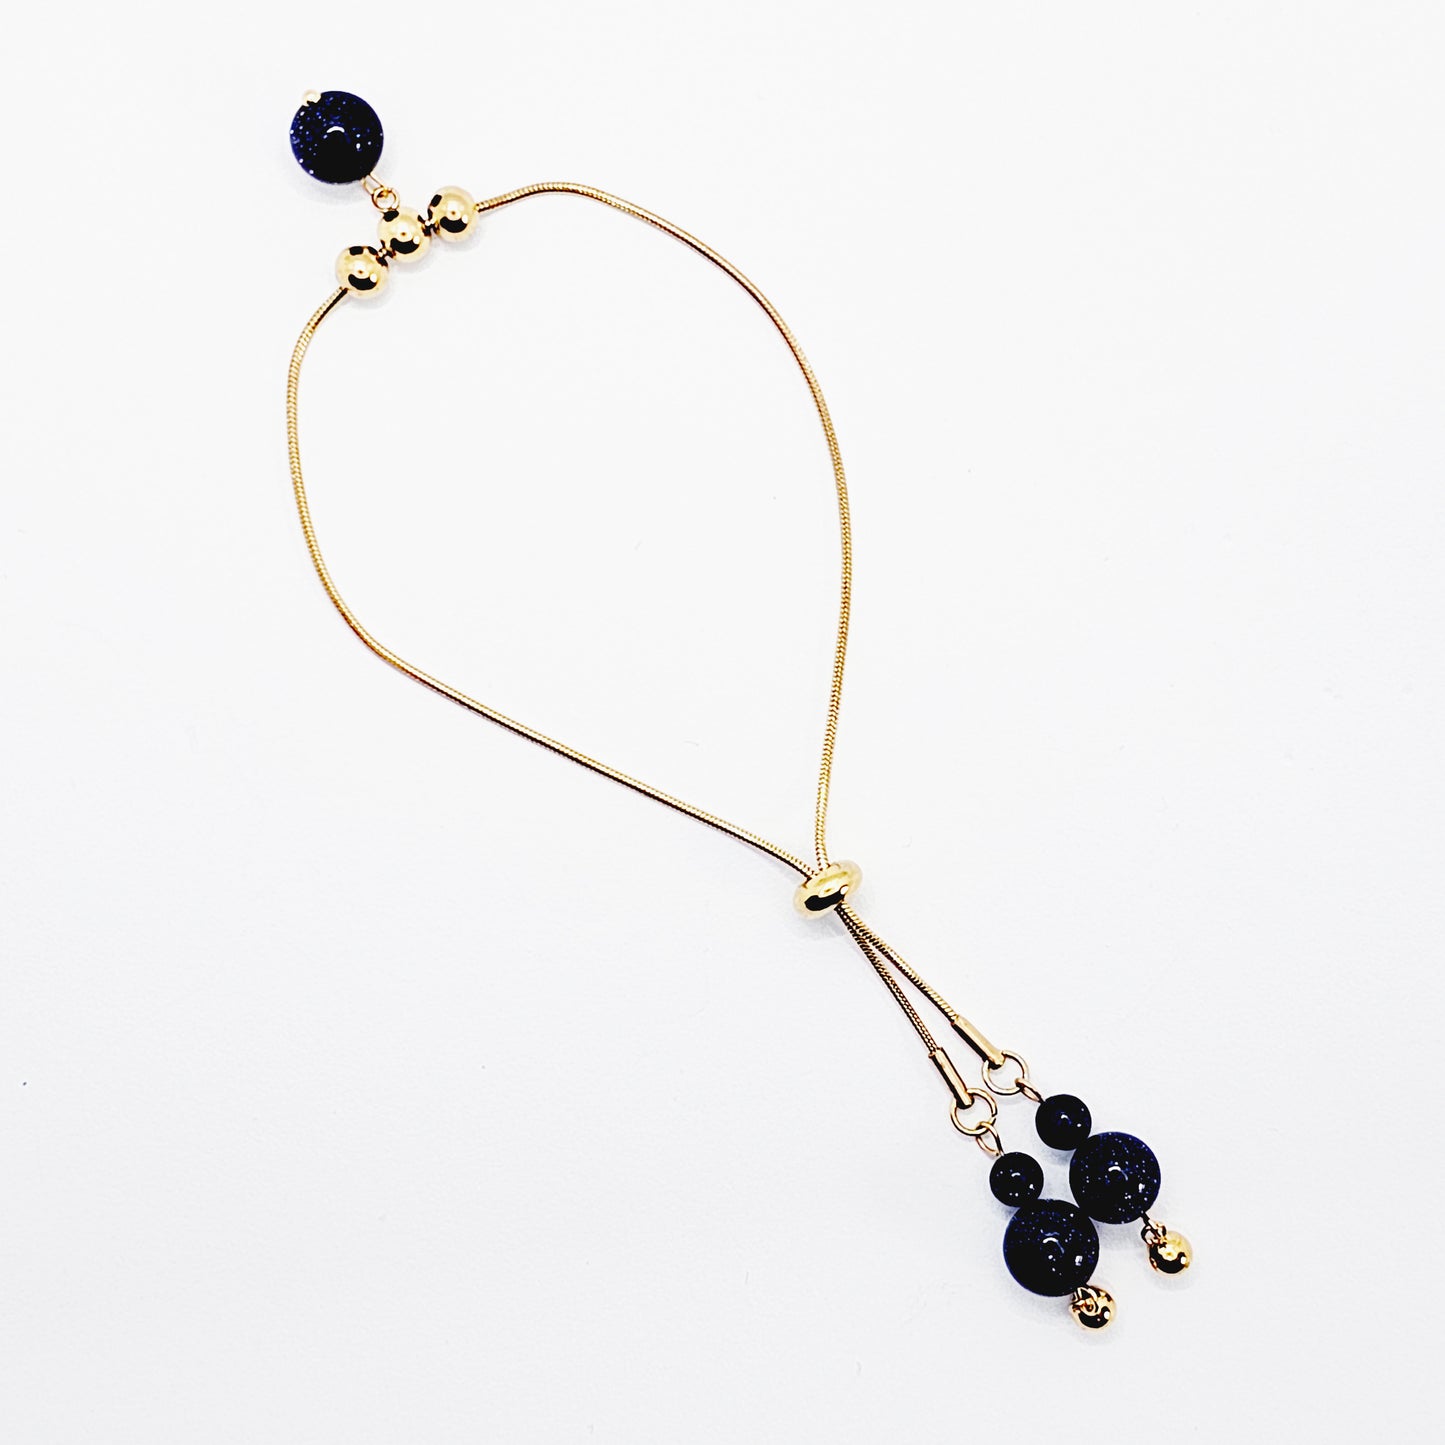 Penis Noose Bracelet with Dazzling Blue Goldstone Beads. Gold Stainless Steel Penis Lasso, Cock Ring Jewelry